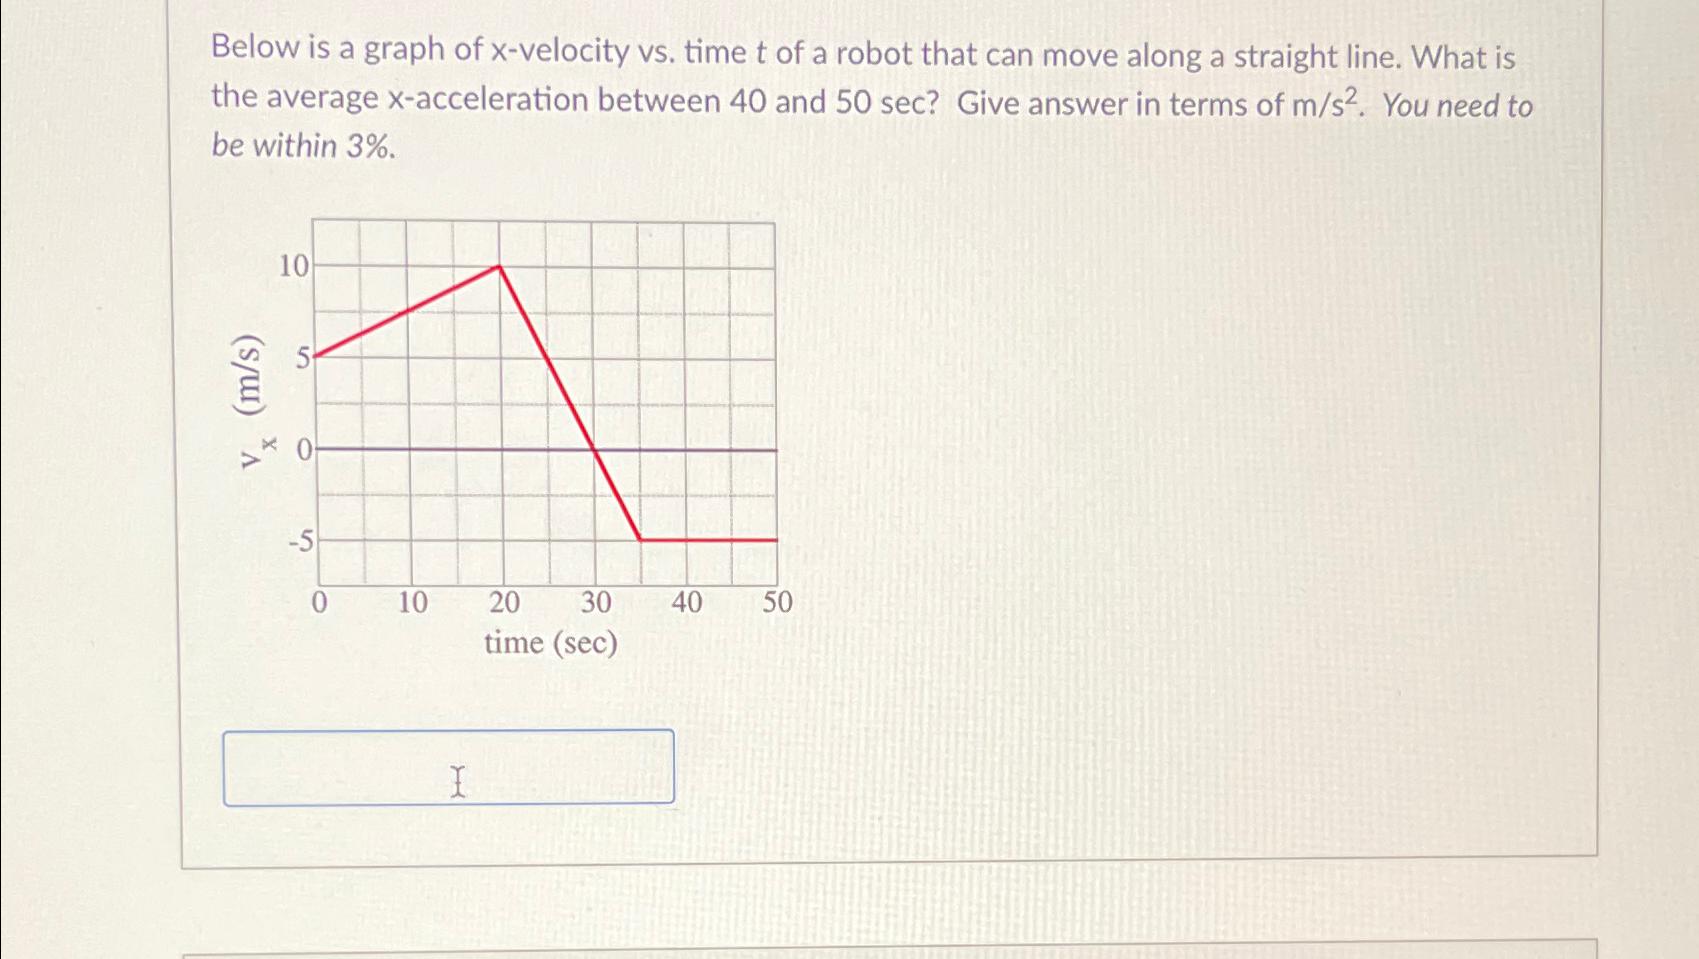 Below is a graph of x-velocity vs. time t of a robot that can move along a straight line. What is the average